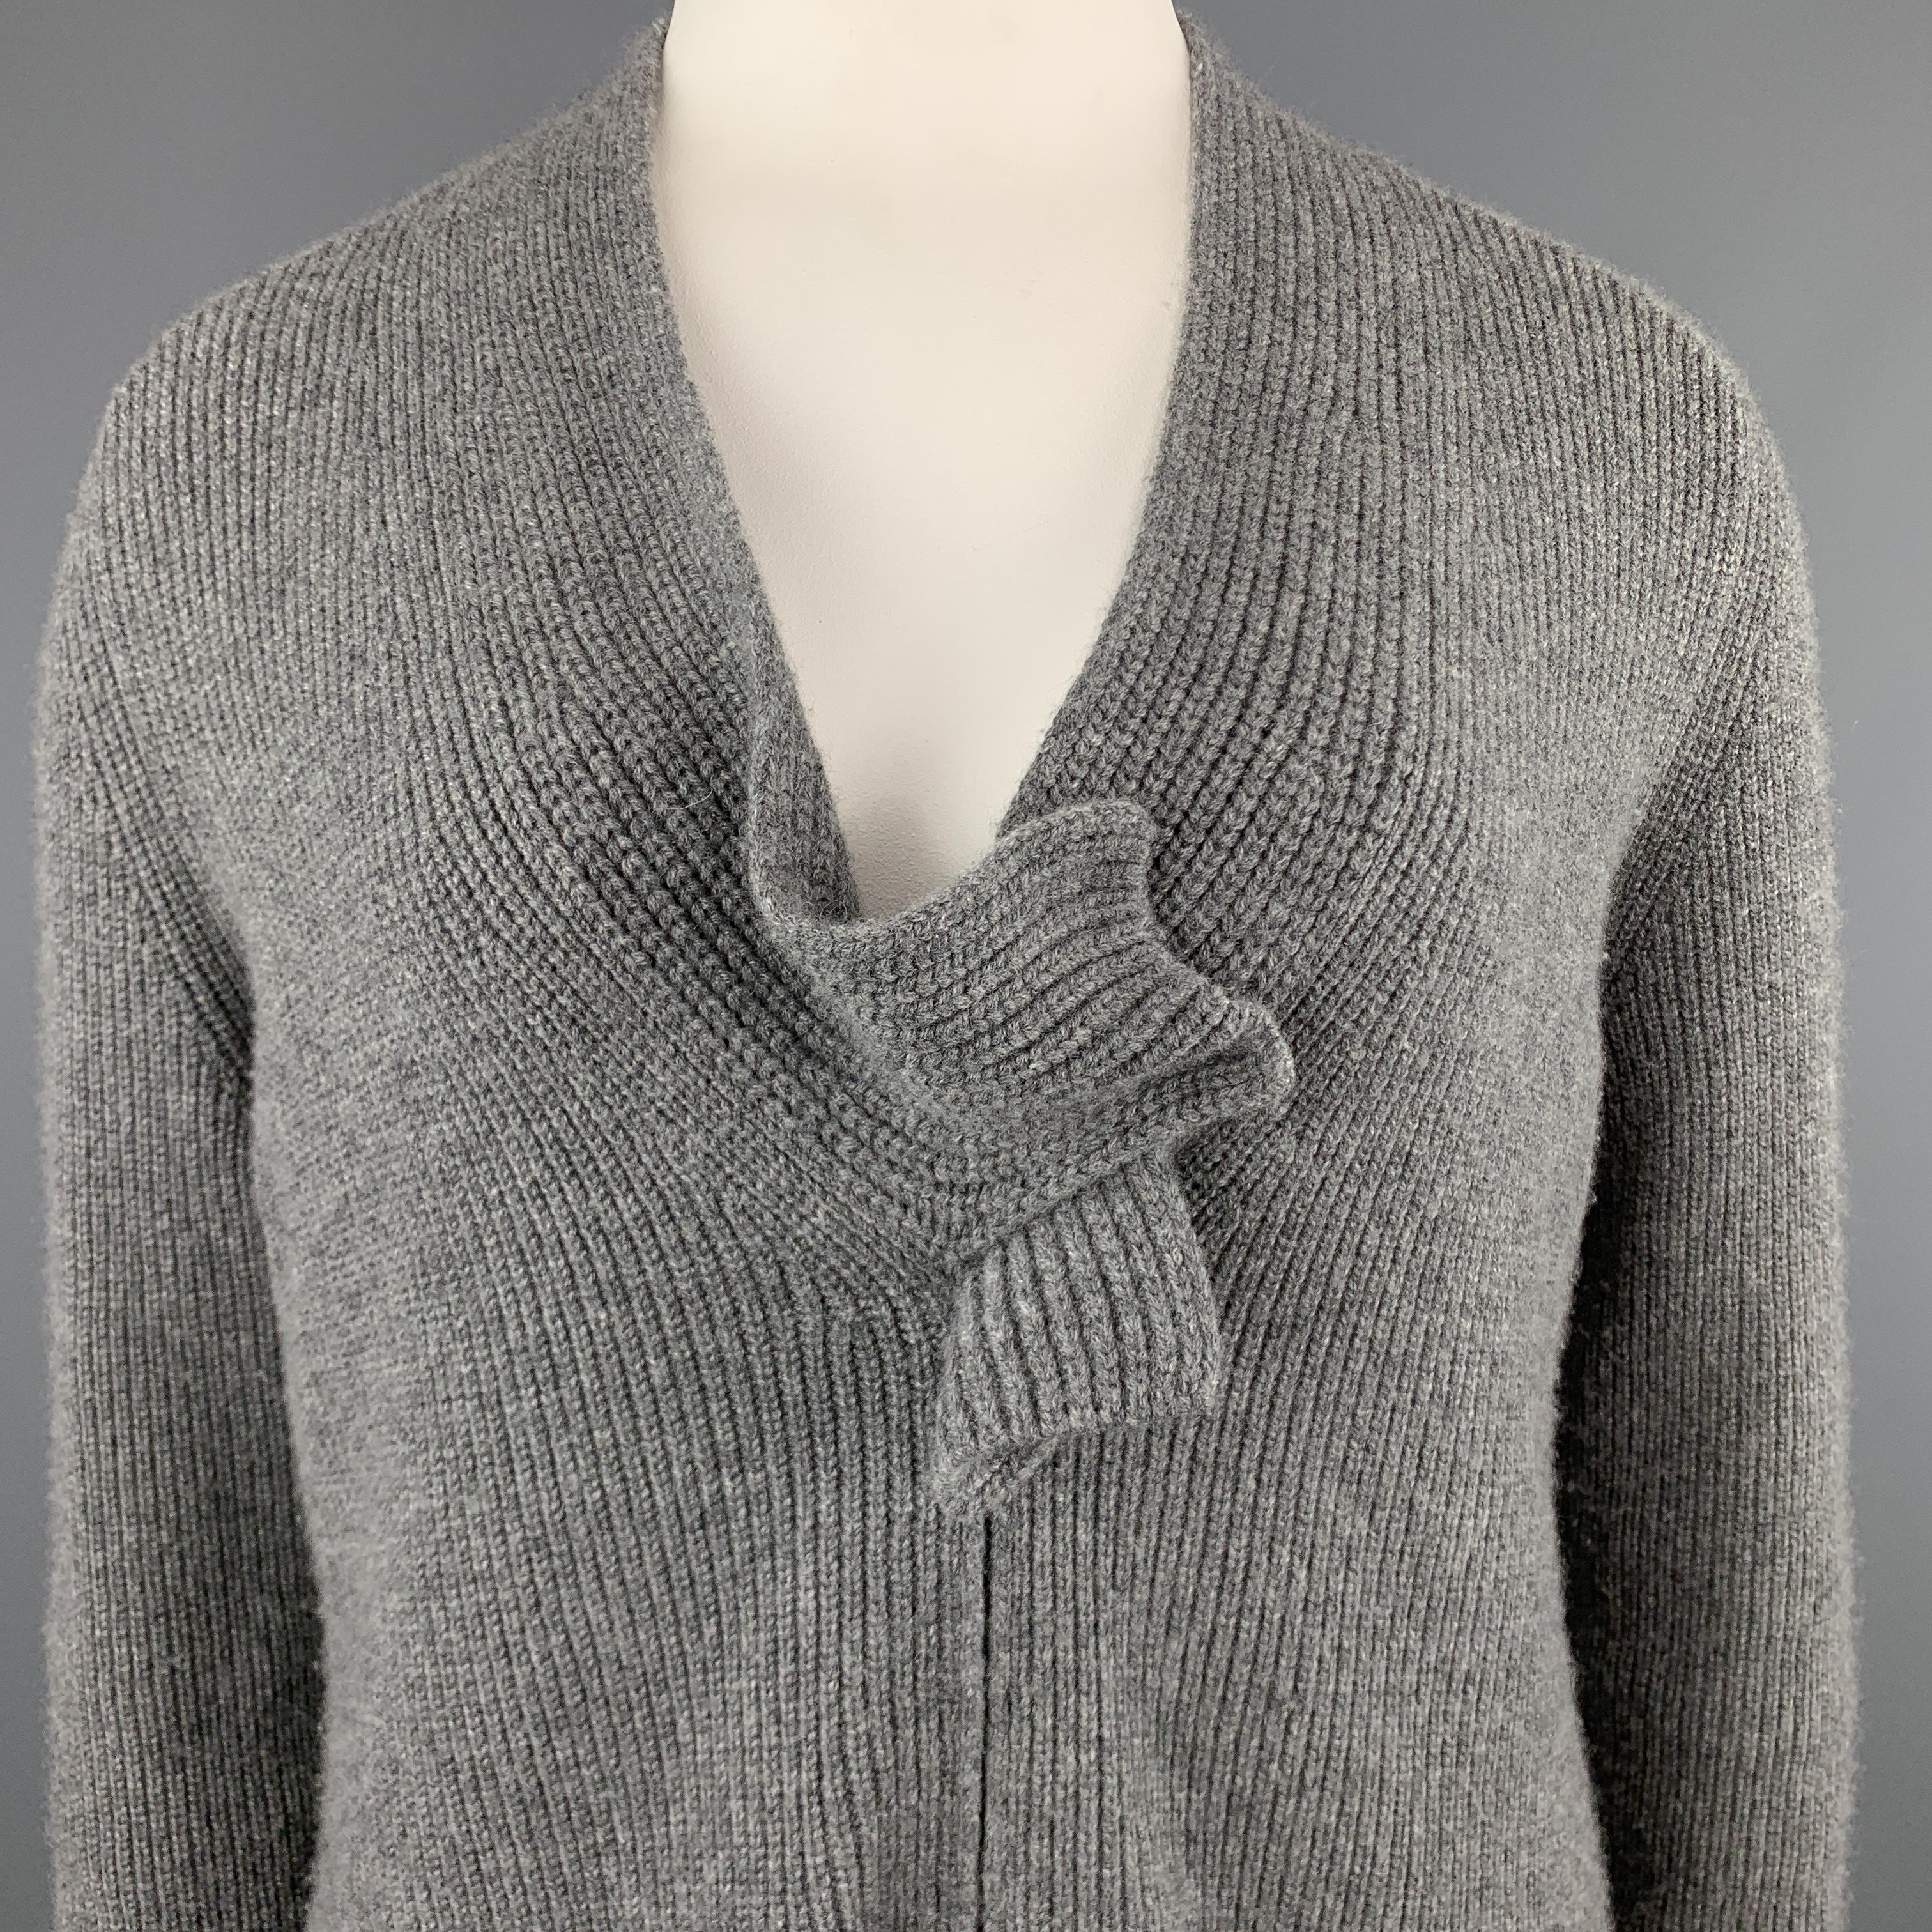 AKRIS oversized sweater comes in a chunky stretch cashmere knit with a zip front and side, and deep V neck with snap knot accent. 

Excellent Pre-Owned Condition.
Marked: 12

Measurements:

Shoulder: 18 in.
Bust: 46 in.
Sleeve: 26 in.
Length:  32 in.